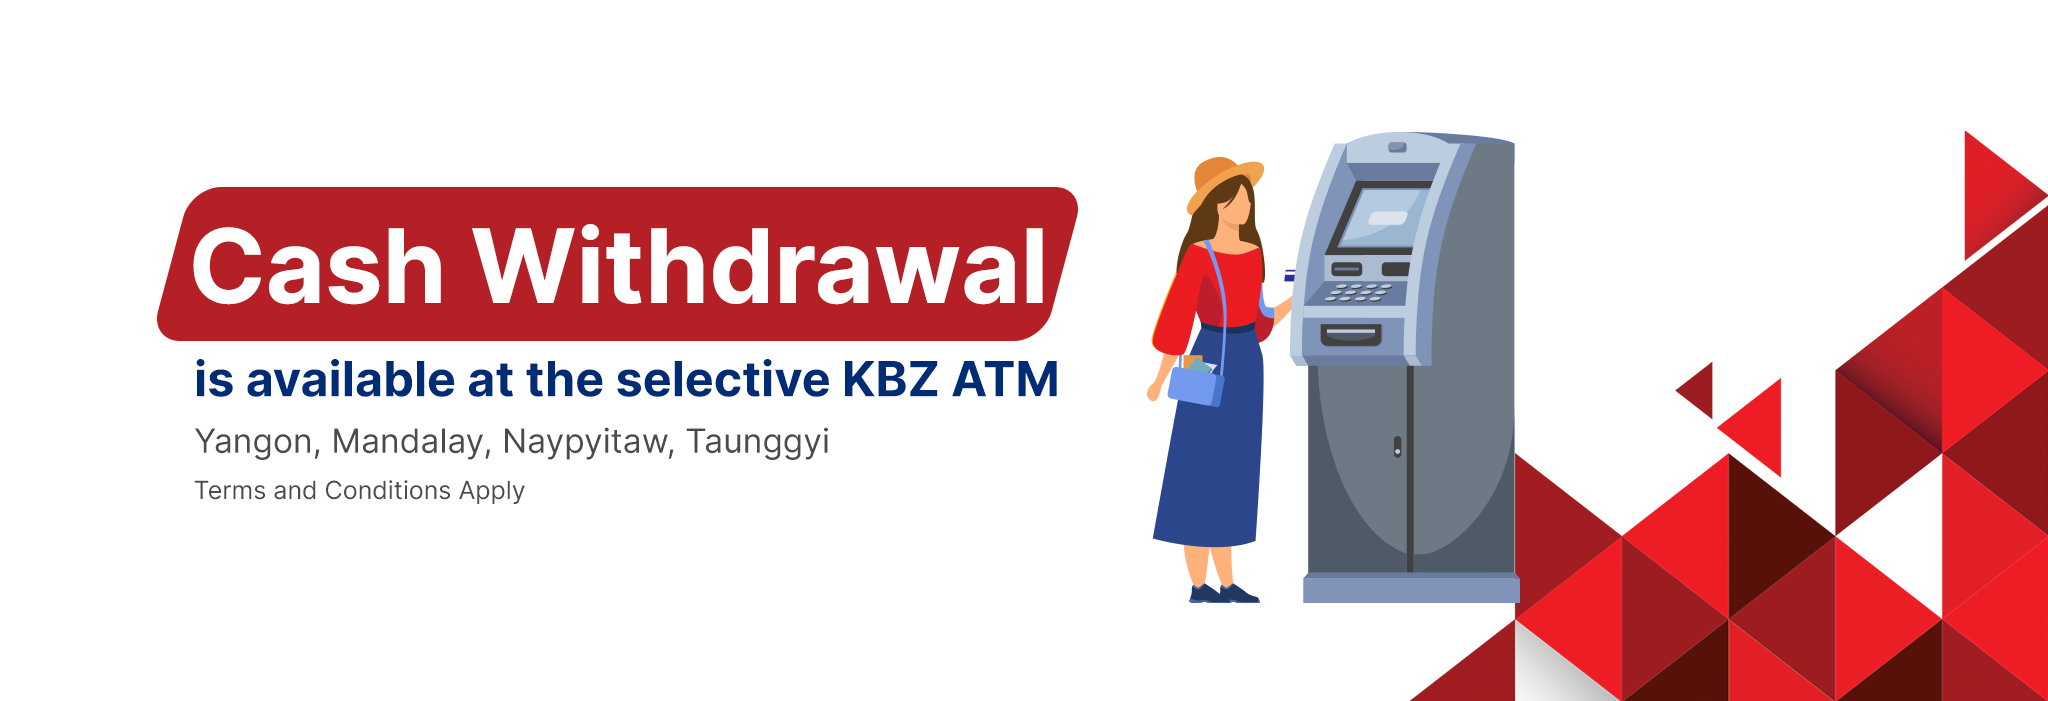 Cash Withdrawal is available at KBZ ATMs in designated cities